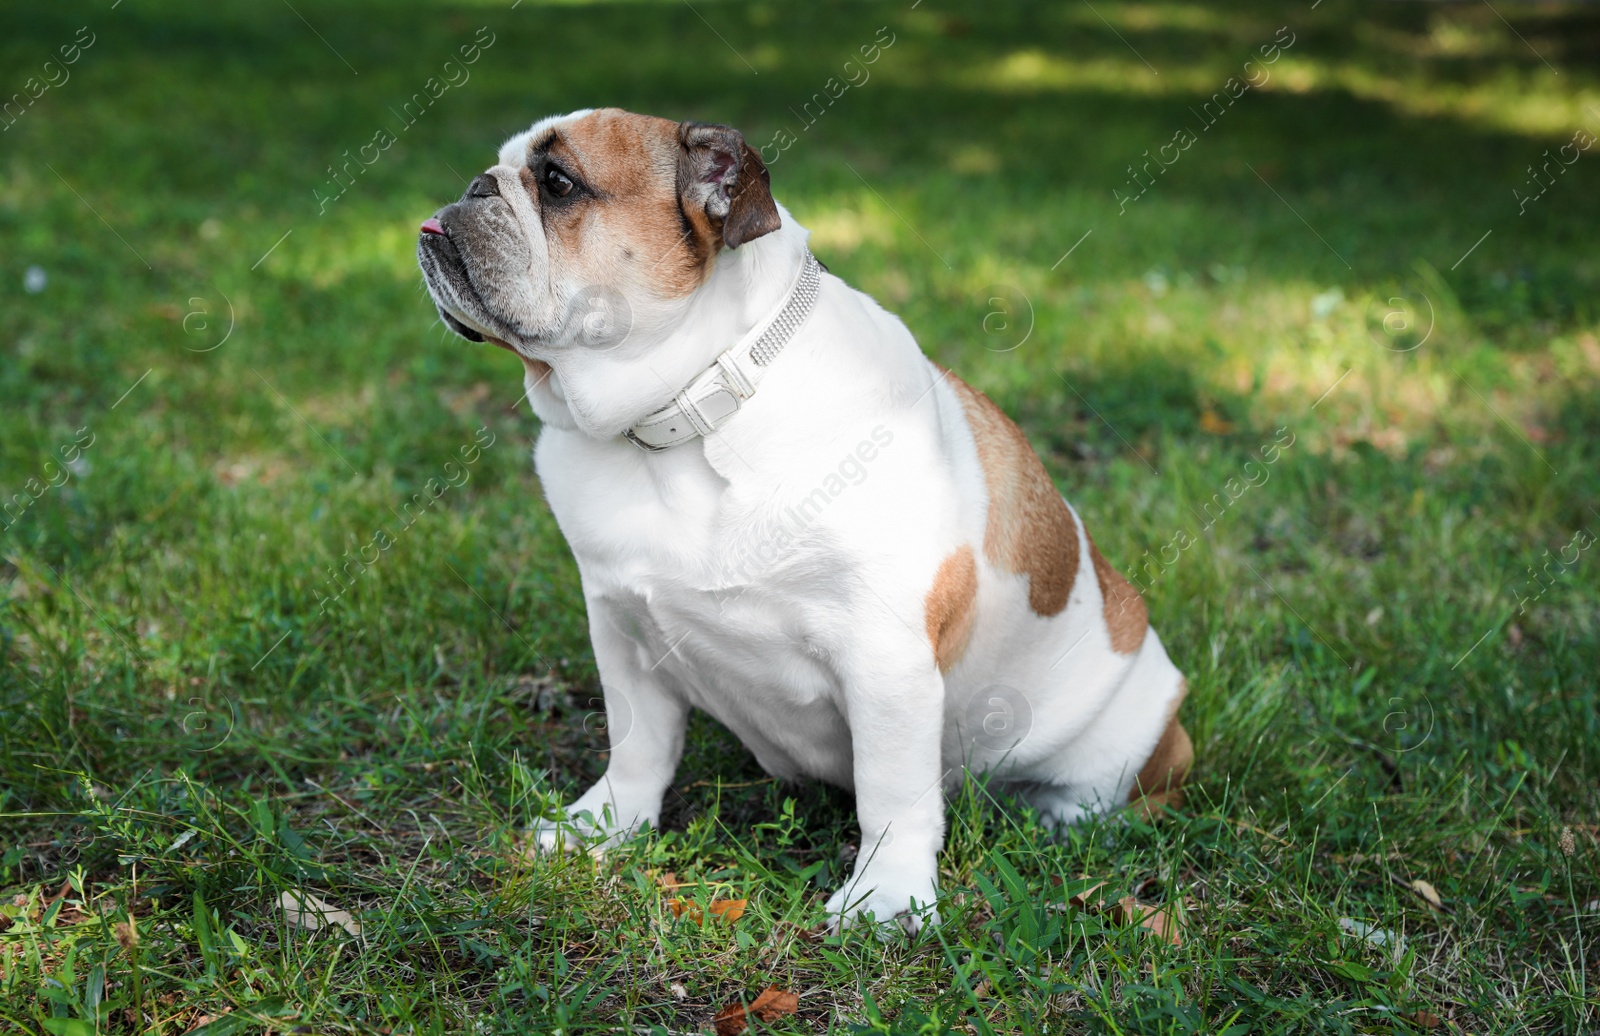 Photo of Funny English bulldog on green grass in park